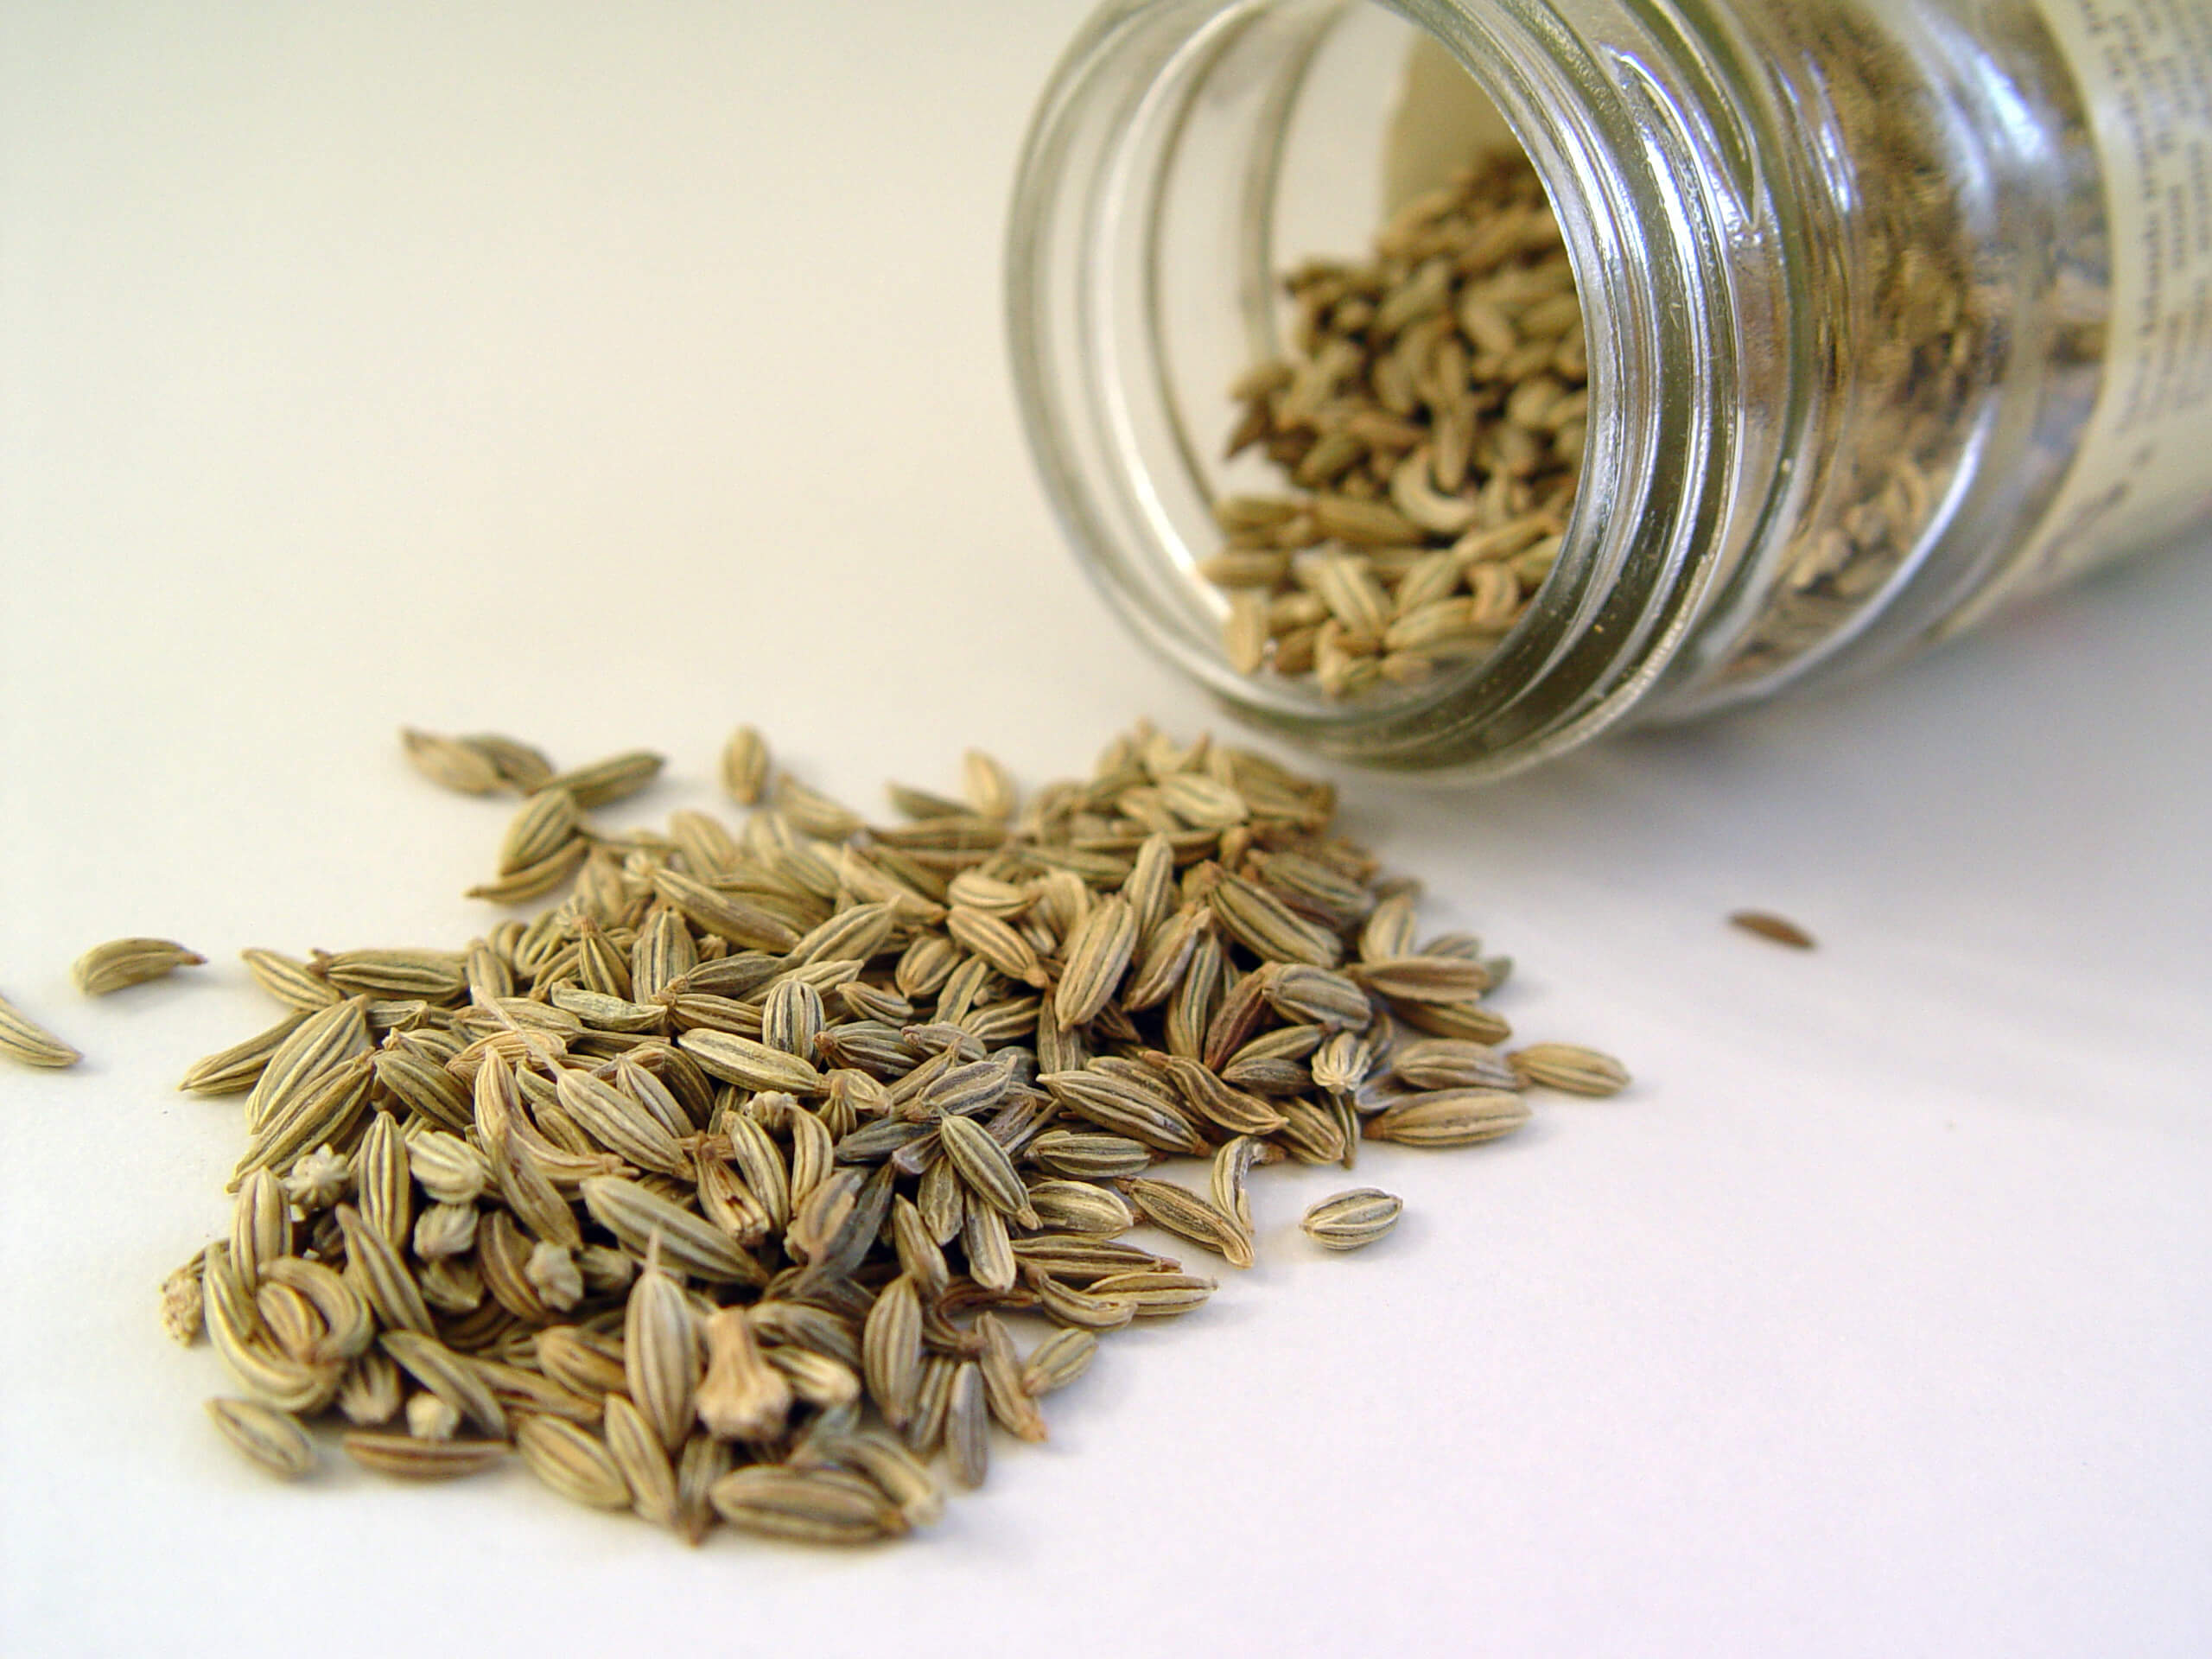 fennel seeds in egypt